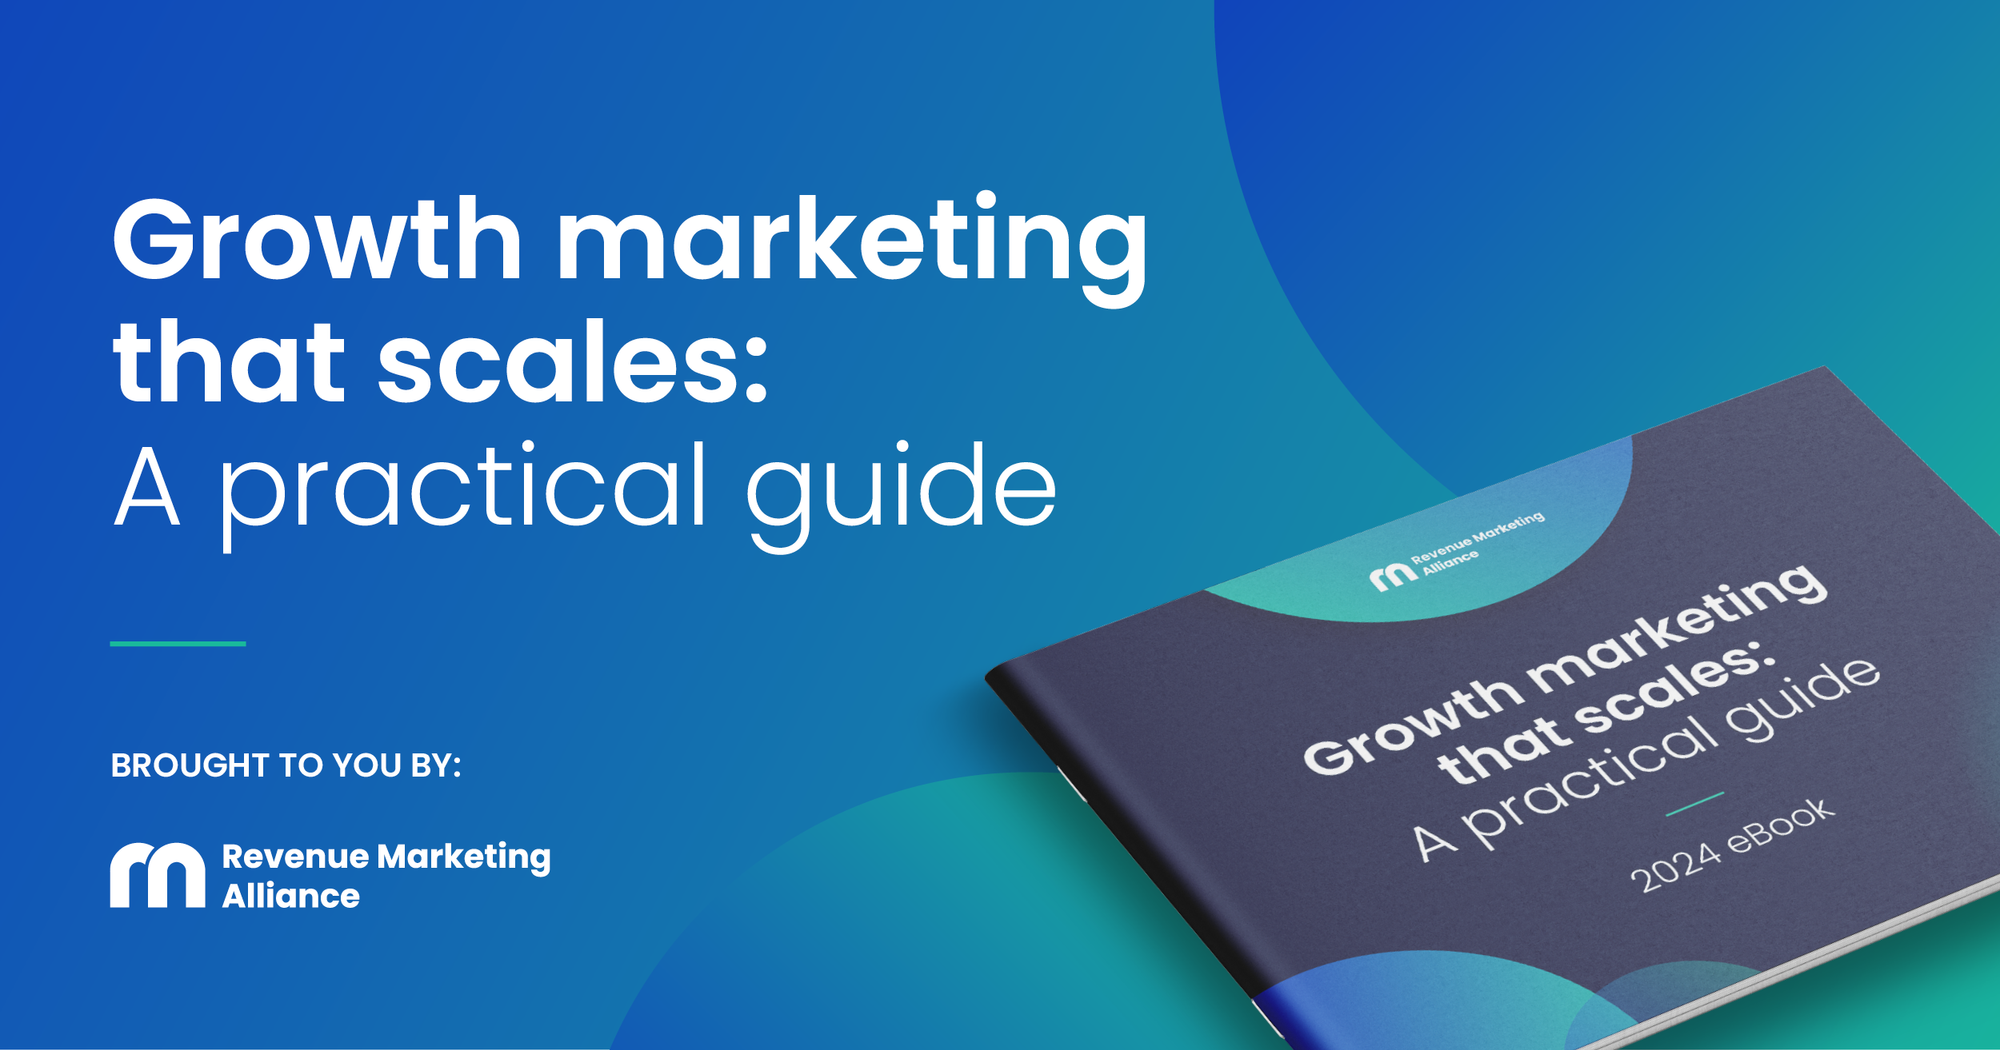 Growth marketing that scales: A practical guide